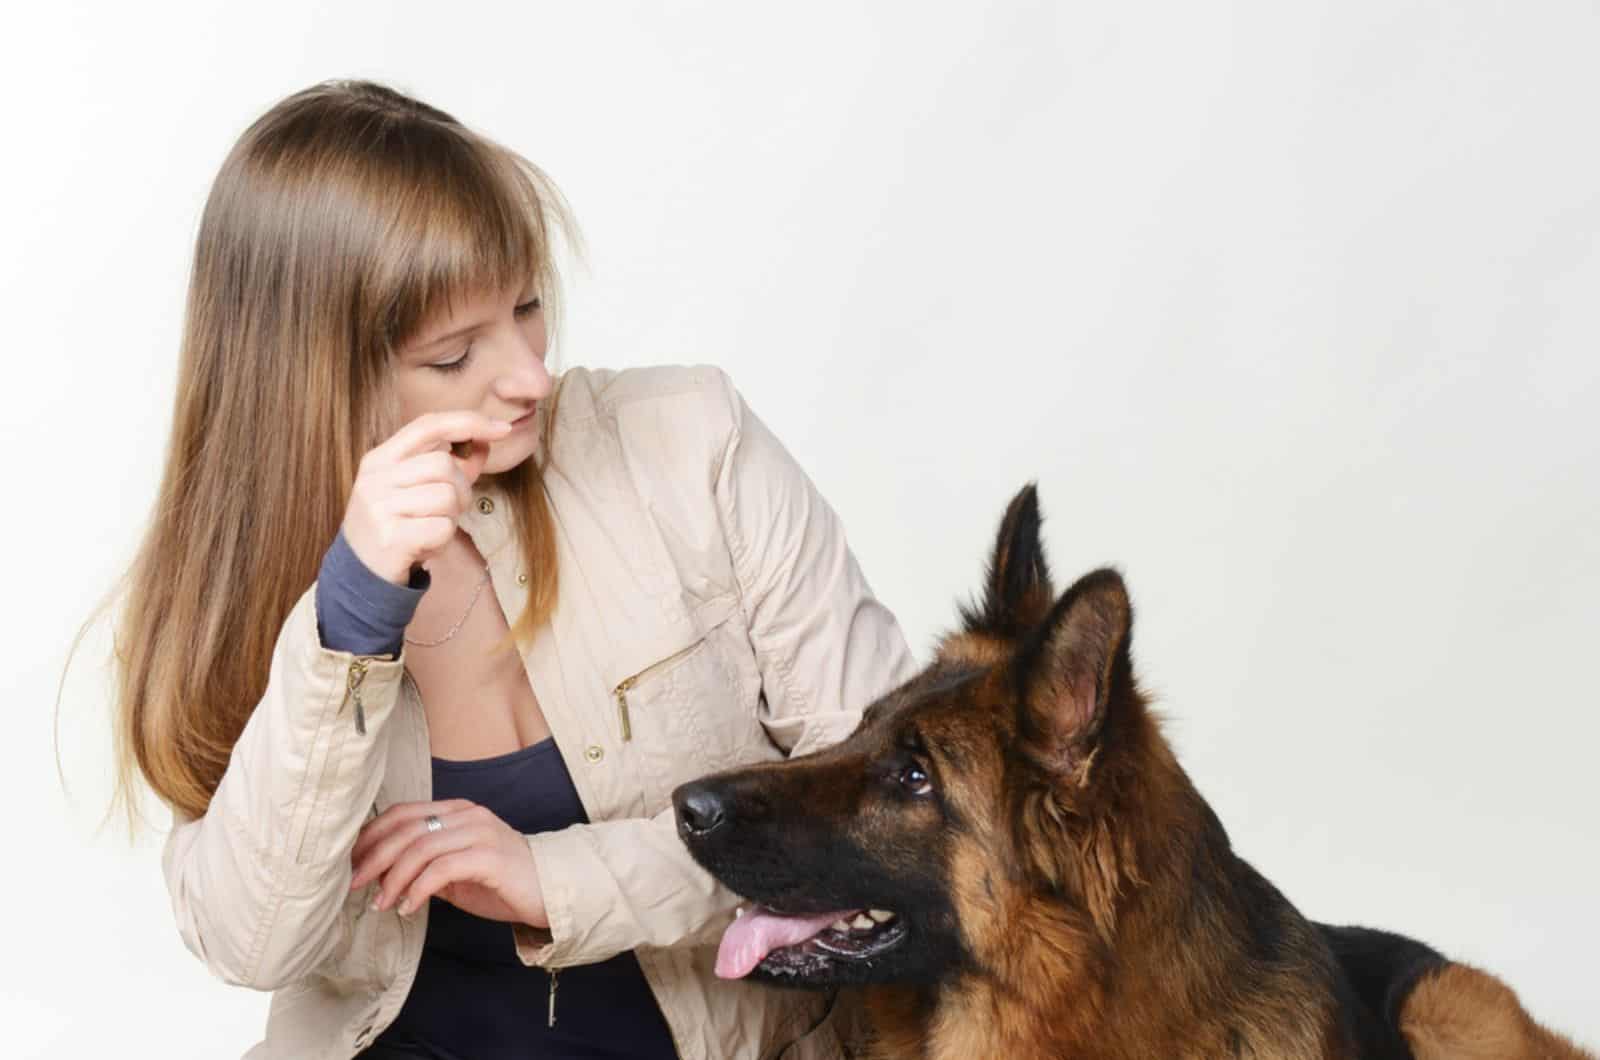 german shepherd leaning on woman's hand and looking at her